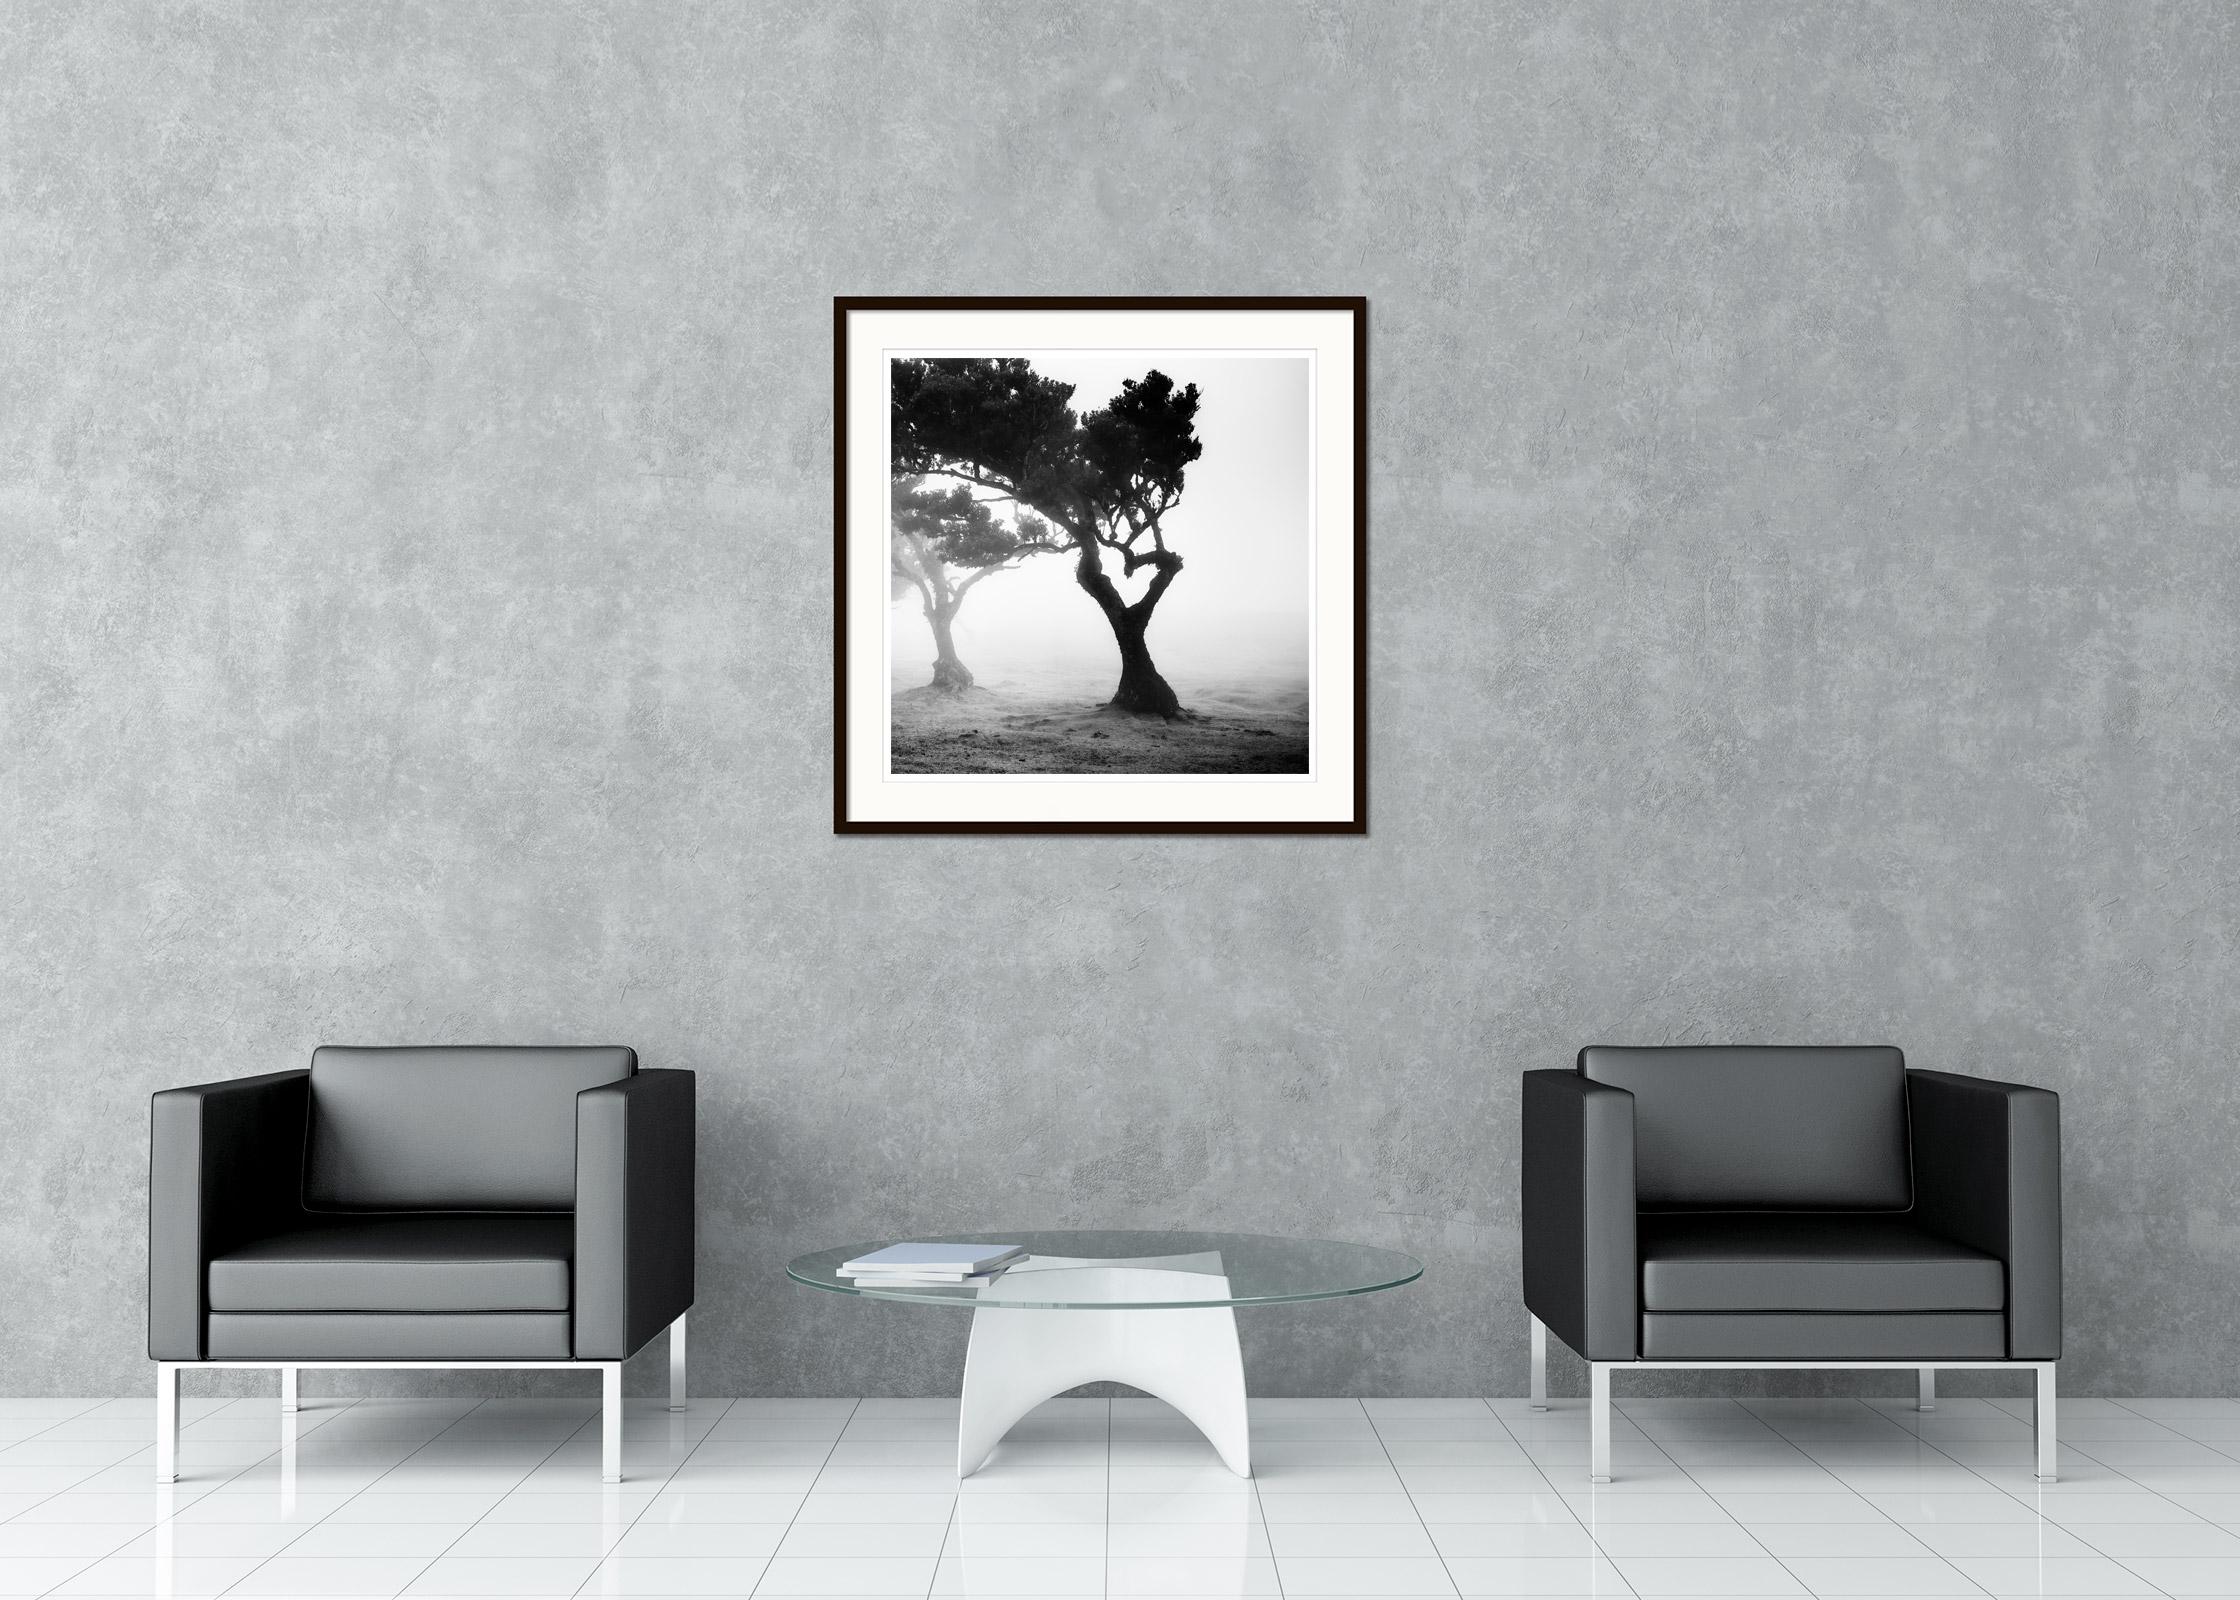 Black and White Fine Art long exposure waterscape photography. Tree in heart shape in fairy forest in fog on beautiful island of madeira. Archival pigment ink print, edition of 7. Signed, titled, dated and numbered by artist. Certificate of